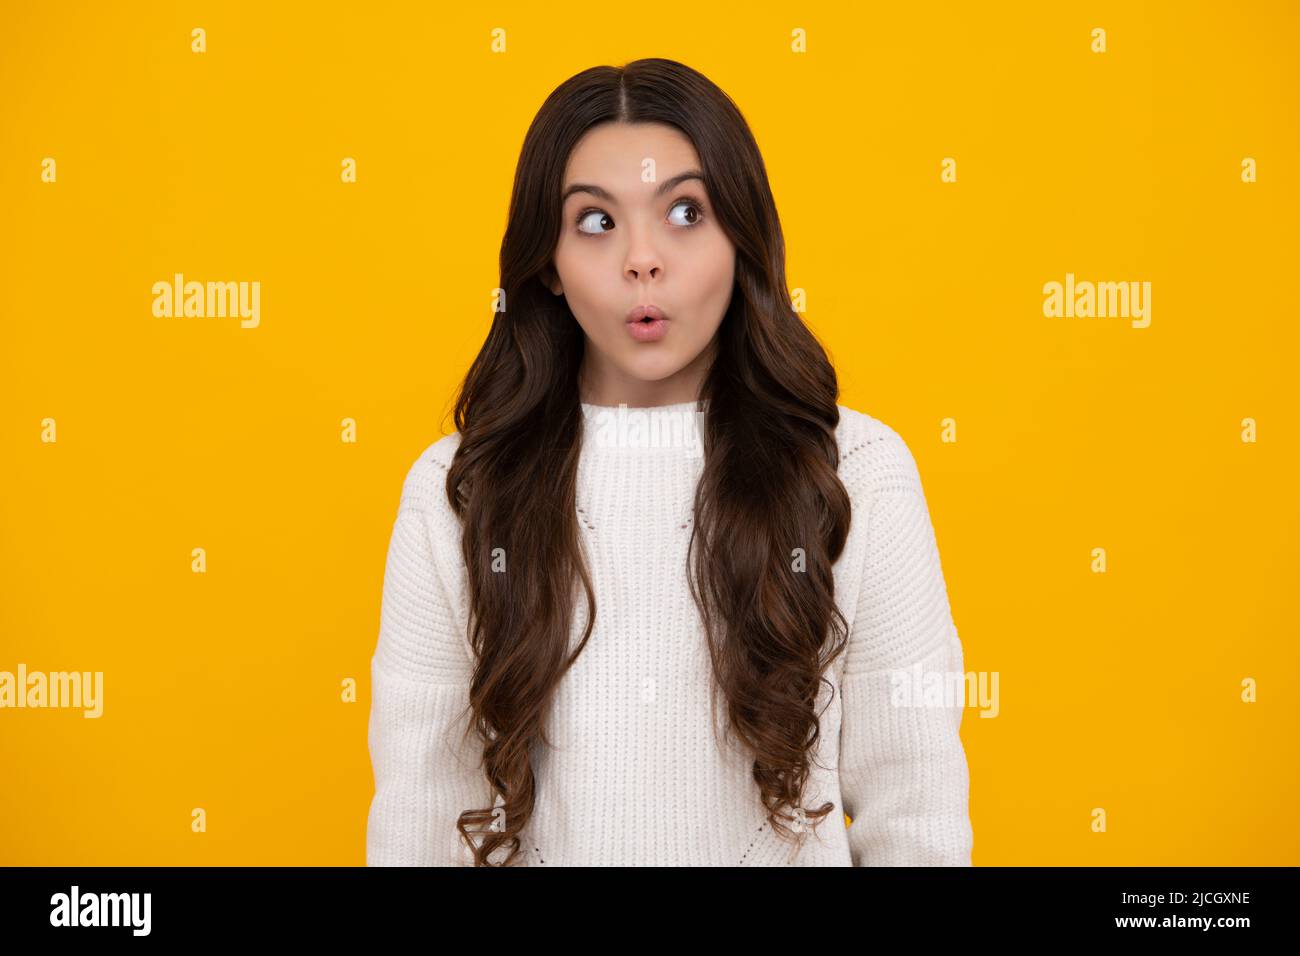 Teenager child girl with shocked facial expression. Surprised face expression, isolated on yellow background. Funny surprise. Surprised teenager girl. Stock Photo